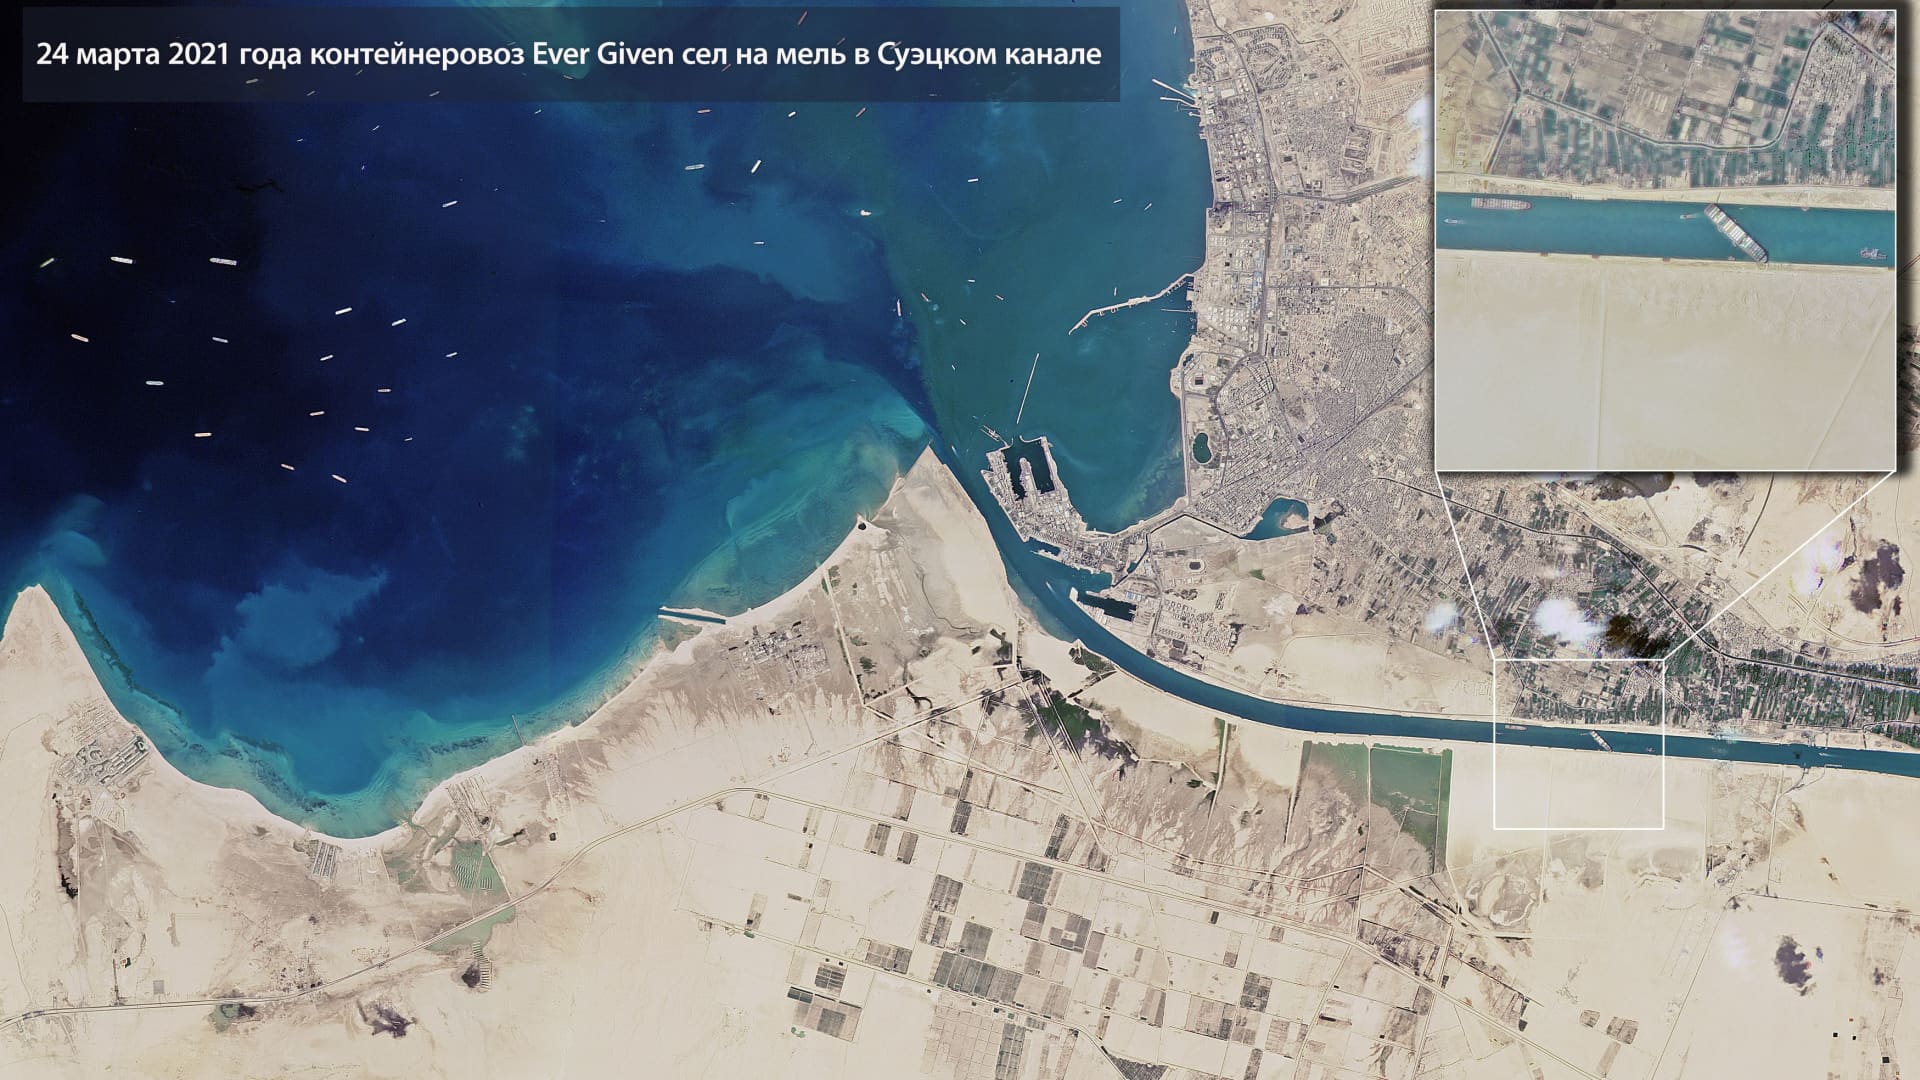 A satellite image shows the Suez Canal blocked by the stranded container ship Ever Given in Egypt March 25, 2021, in this image obtained from Twitter page of Director General of Roscosmos Dmitry Rogozin. Picture taken March 25, 2021.